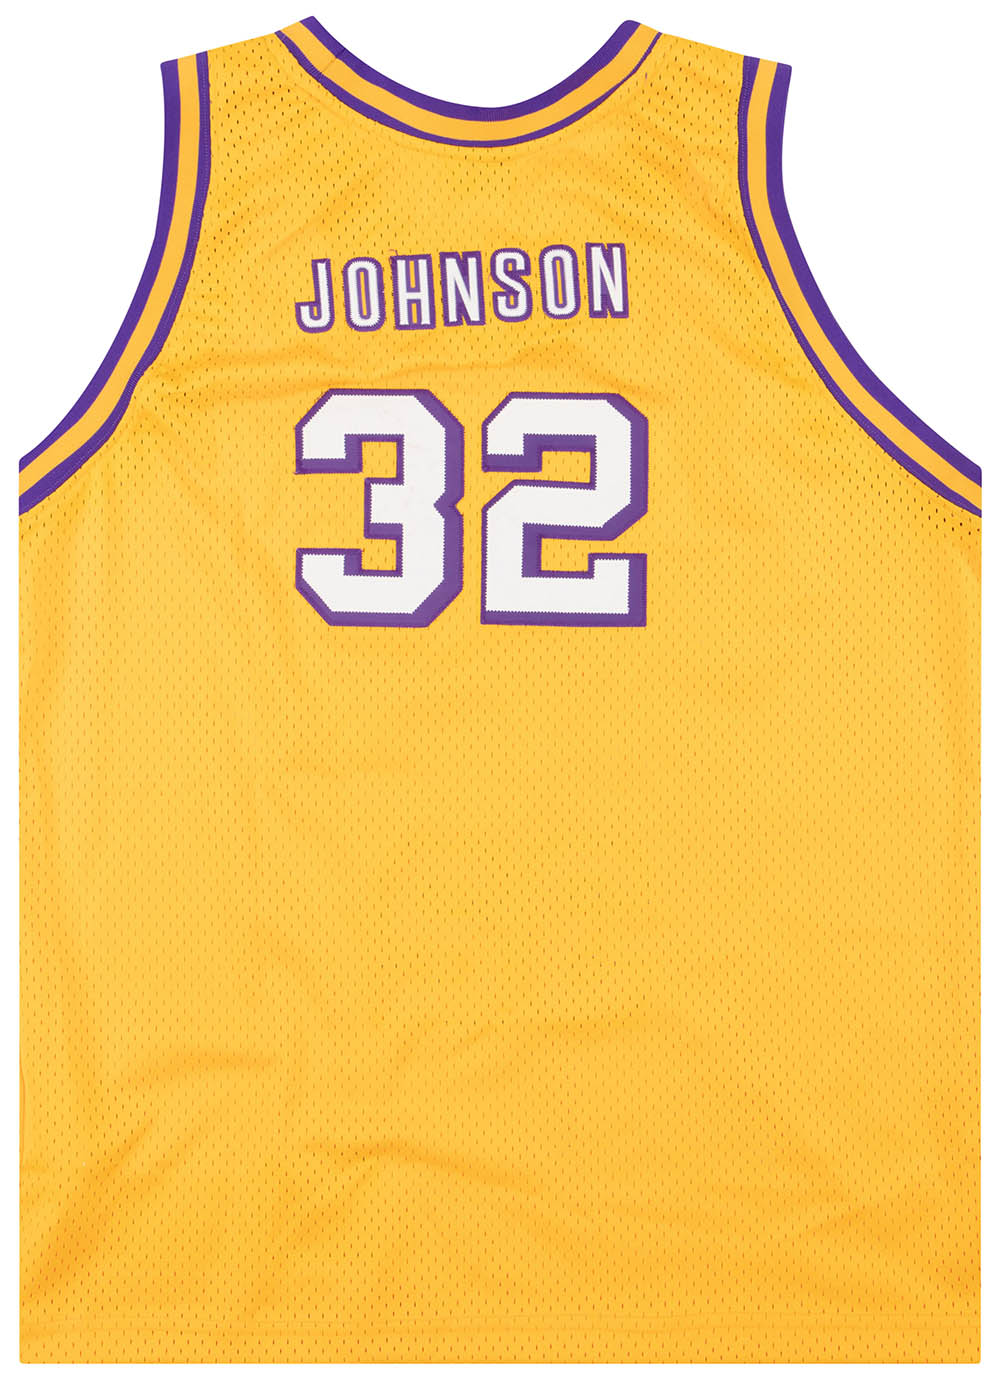 lakers jersey classic edition